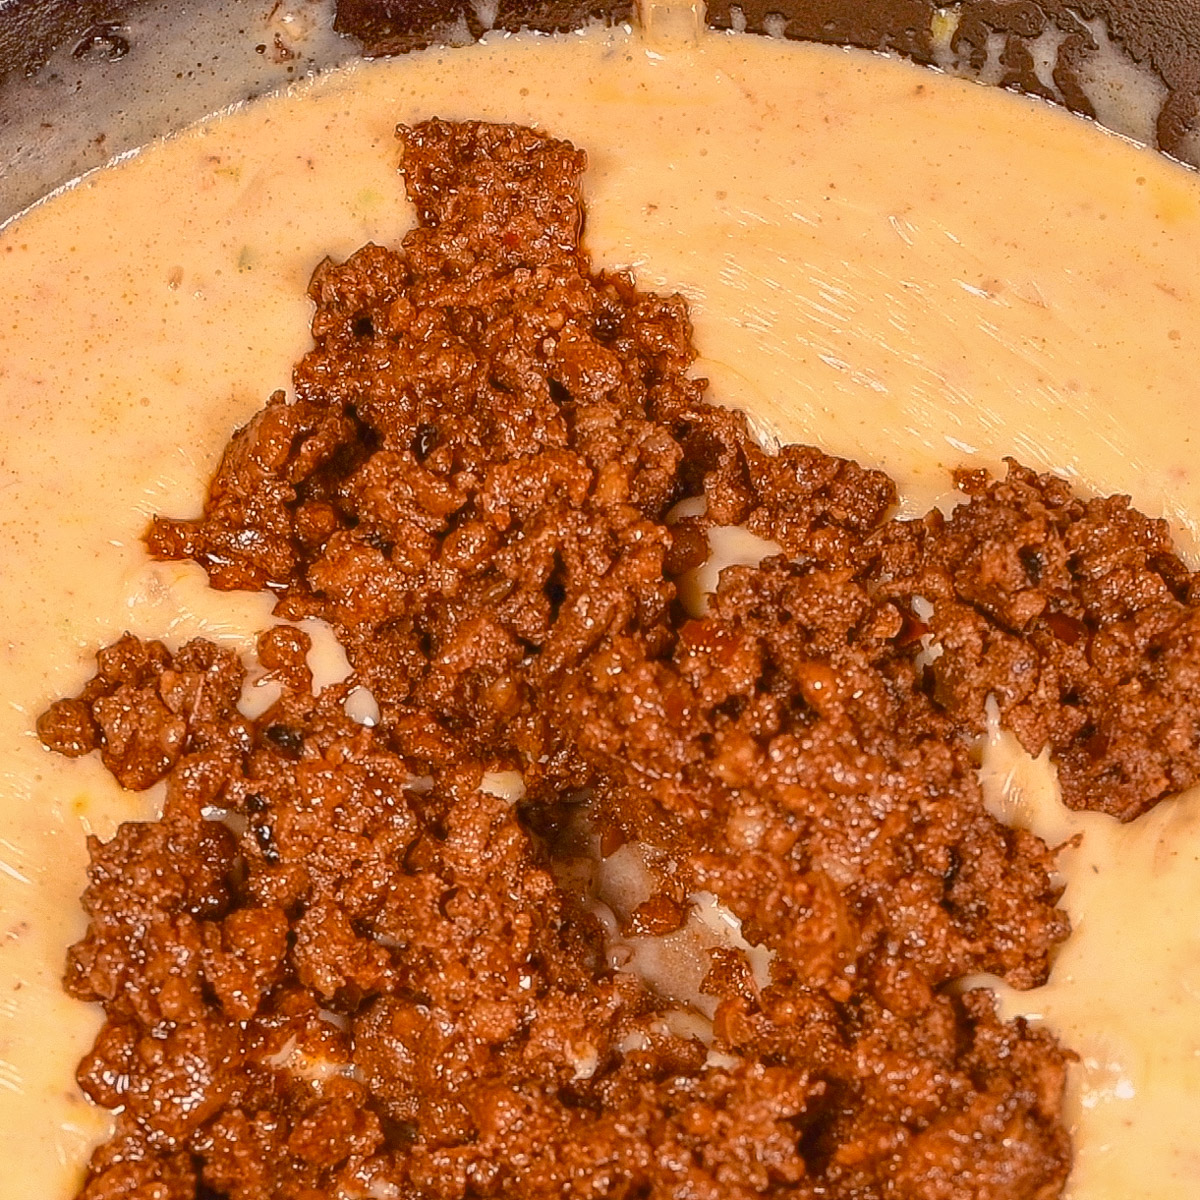 Add the cooked chorizo to the melted cheese mixture and stir to combine.